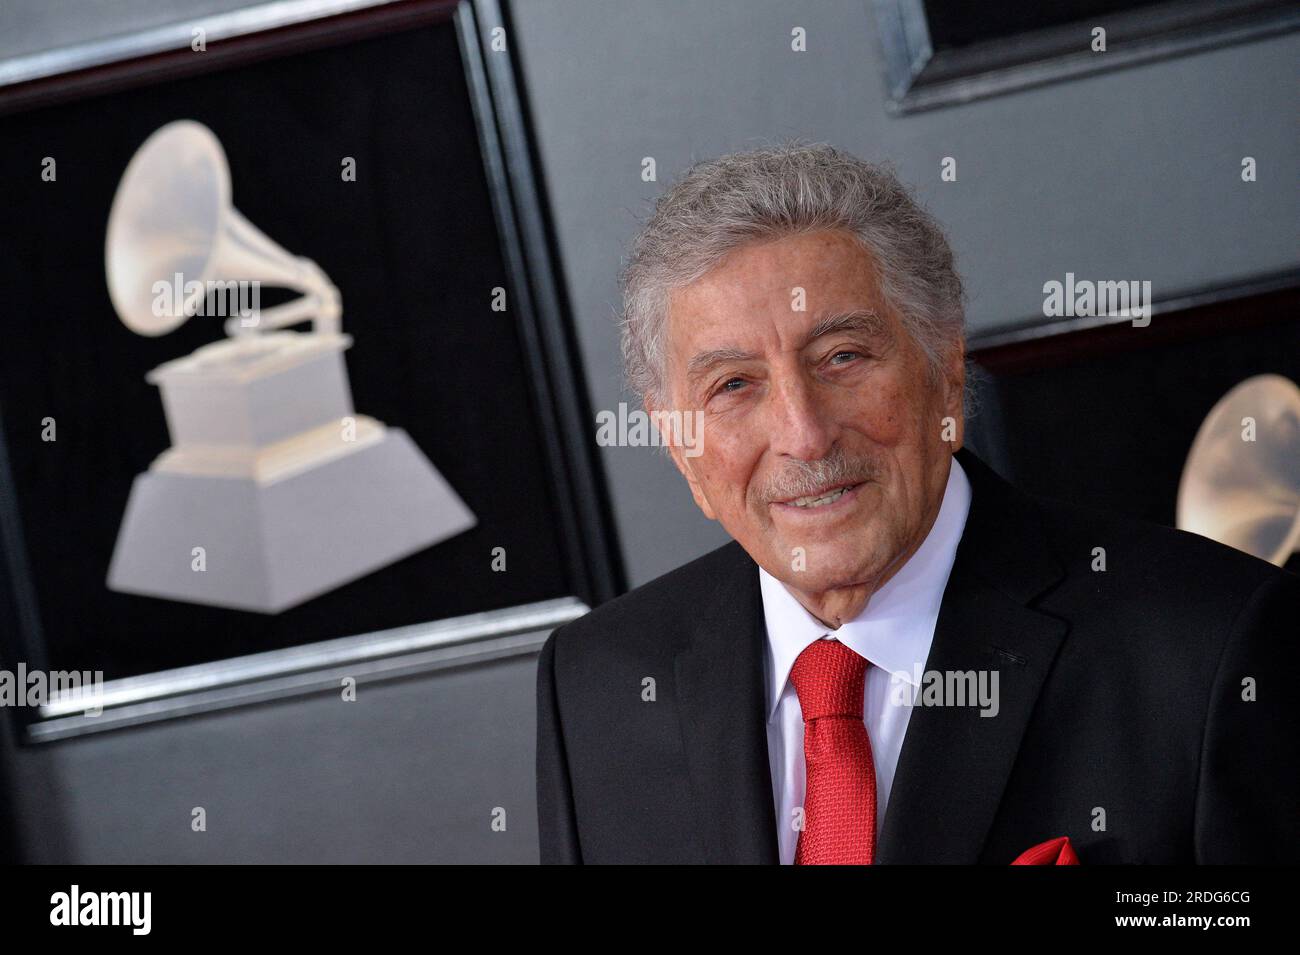 New York City, United States. 21st July, 2023. Tony Bennett Dies At 96 - FILE -Tony Bennett attends the 60th Annual GRAMMY Awards at Madison Square Garden on January 28, 2018 in New York City, NY, USA. Photo by Lionel Hahn/ABACAPRESS.COM Credit: Abaca Press/Alamy Live News Stock Photo